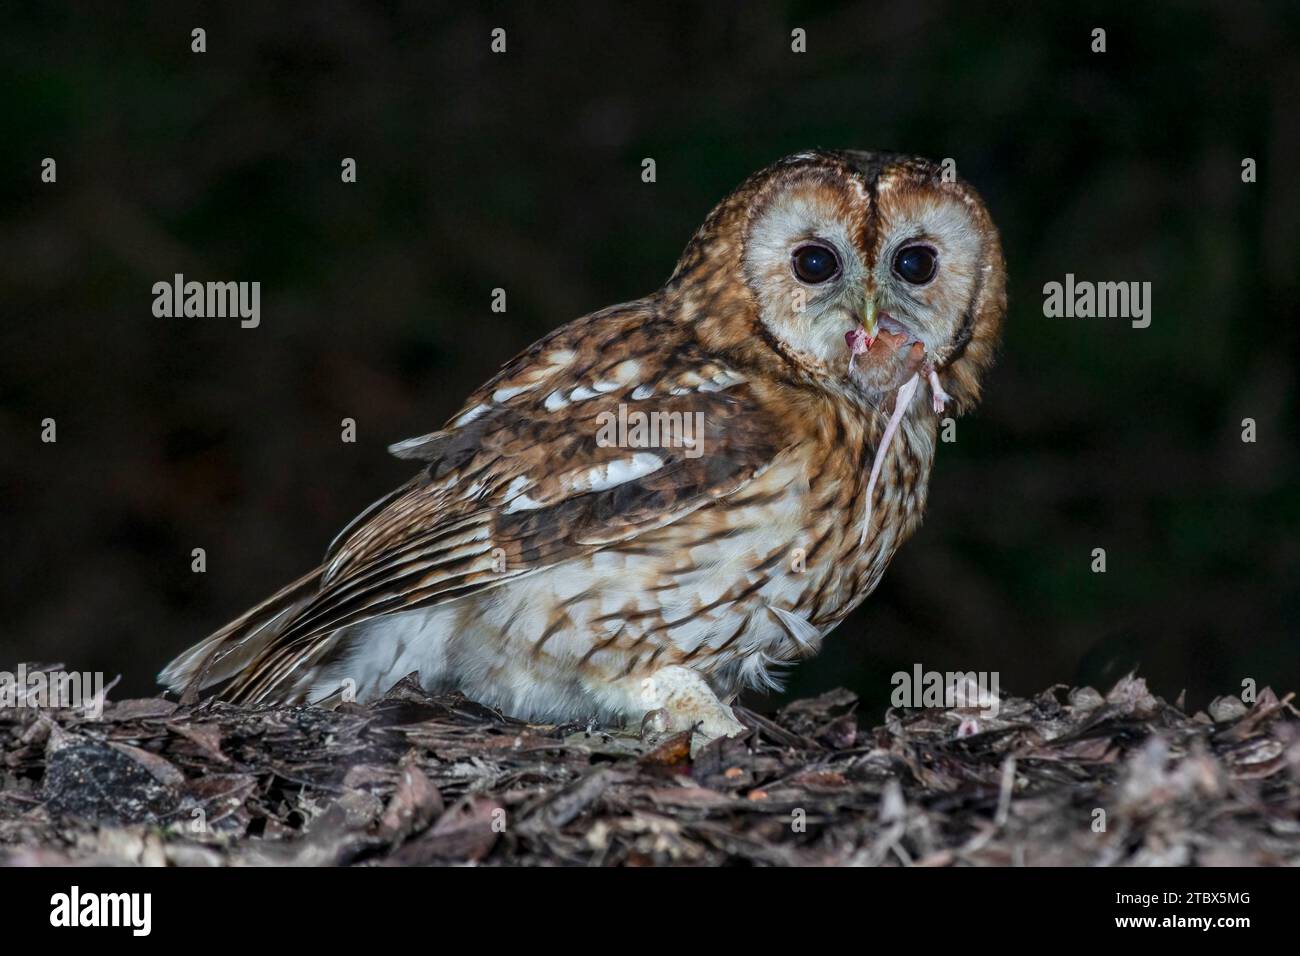 A tawny owl, Strix aluco, taken at night. It is staring at the camera and has a half eaten prey in its beak. A dark background with space for text. Stock Photo